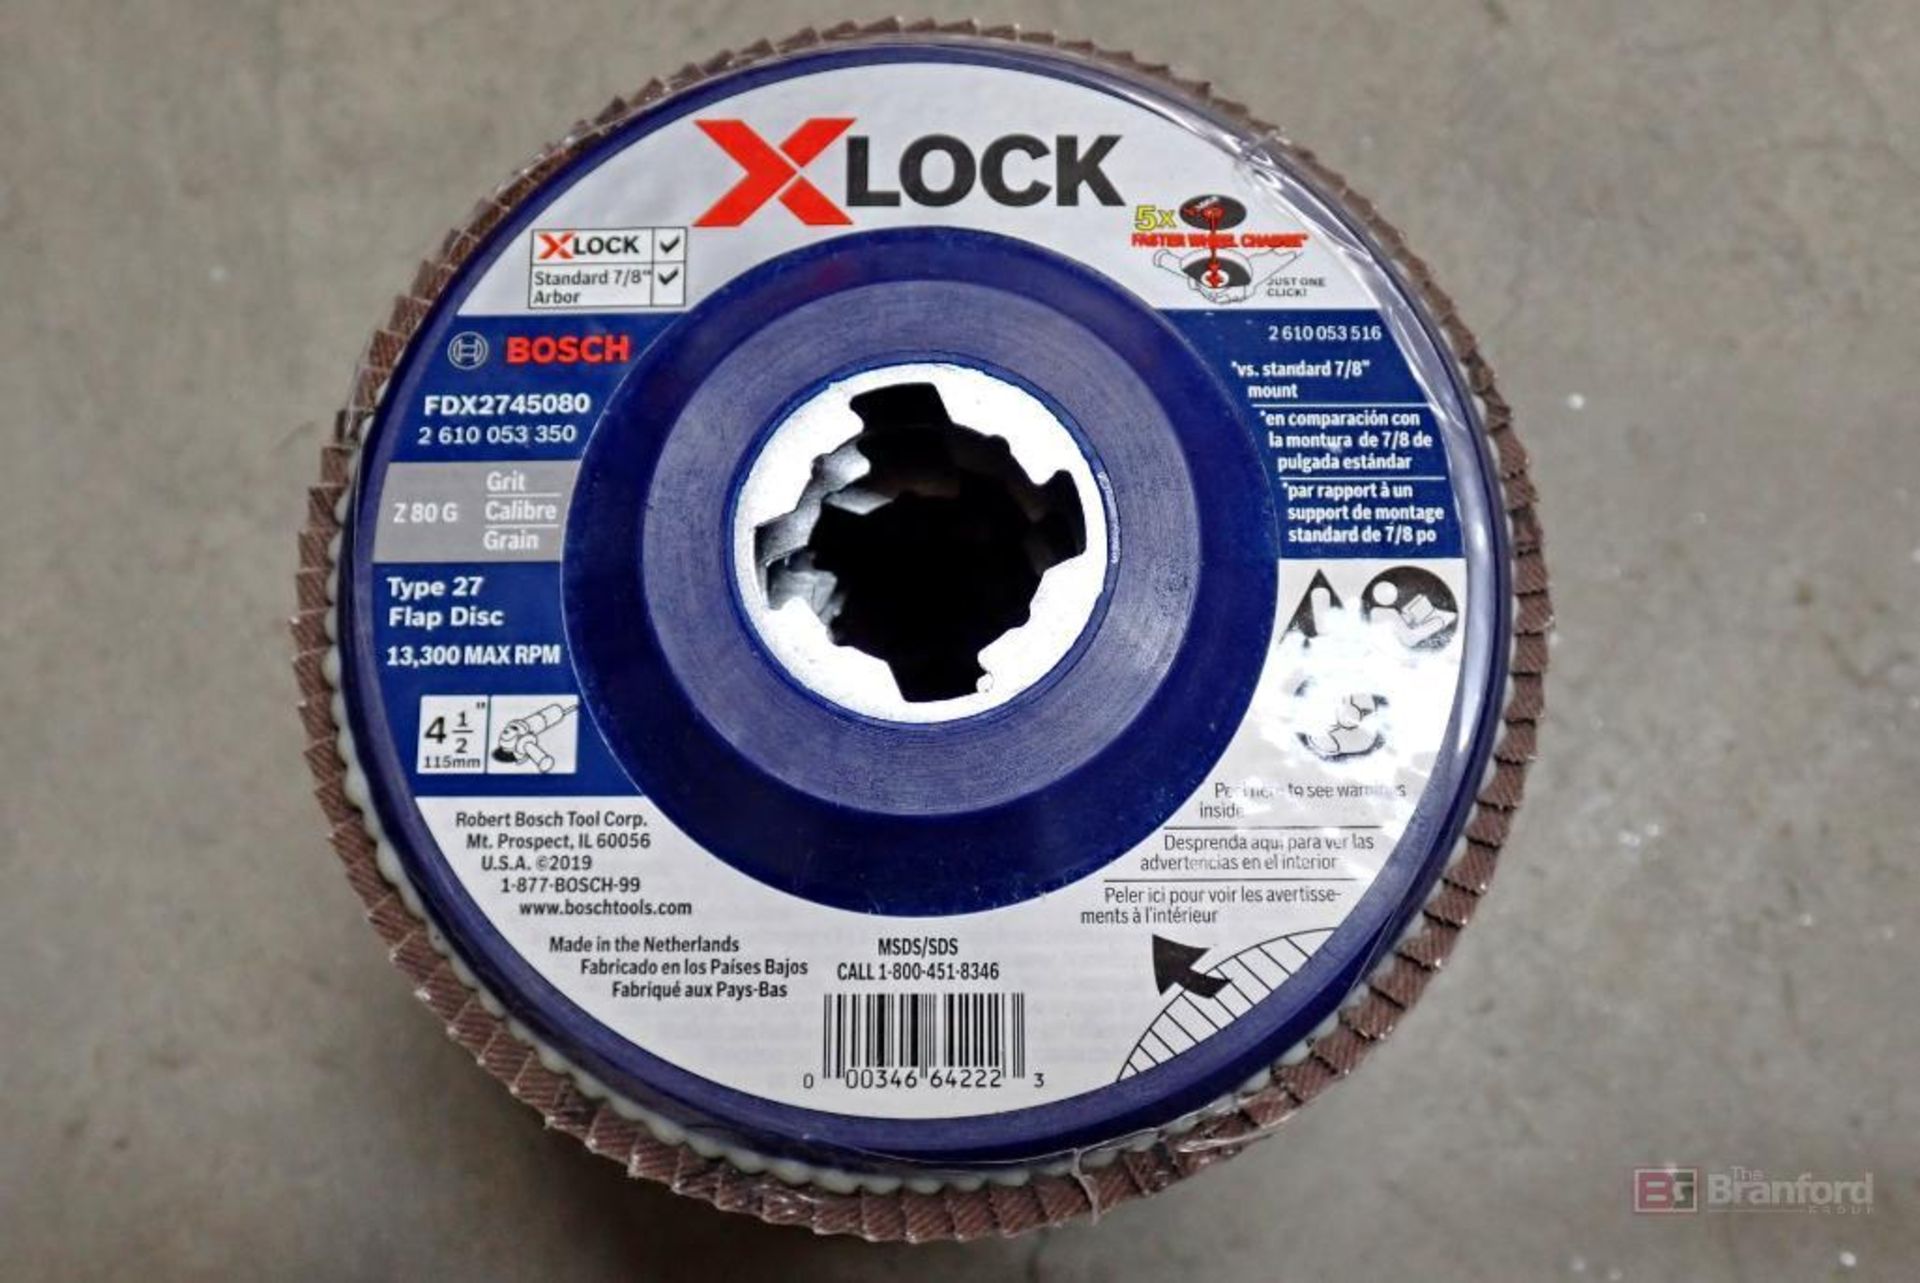 (1) Case of Bosch FDX2745080 Type 27 Flap Disc Grinding Wheels - Image 4 of 4